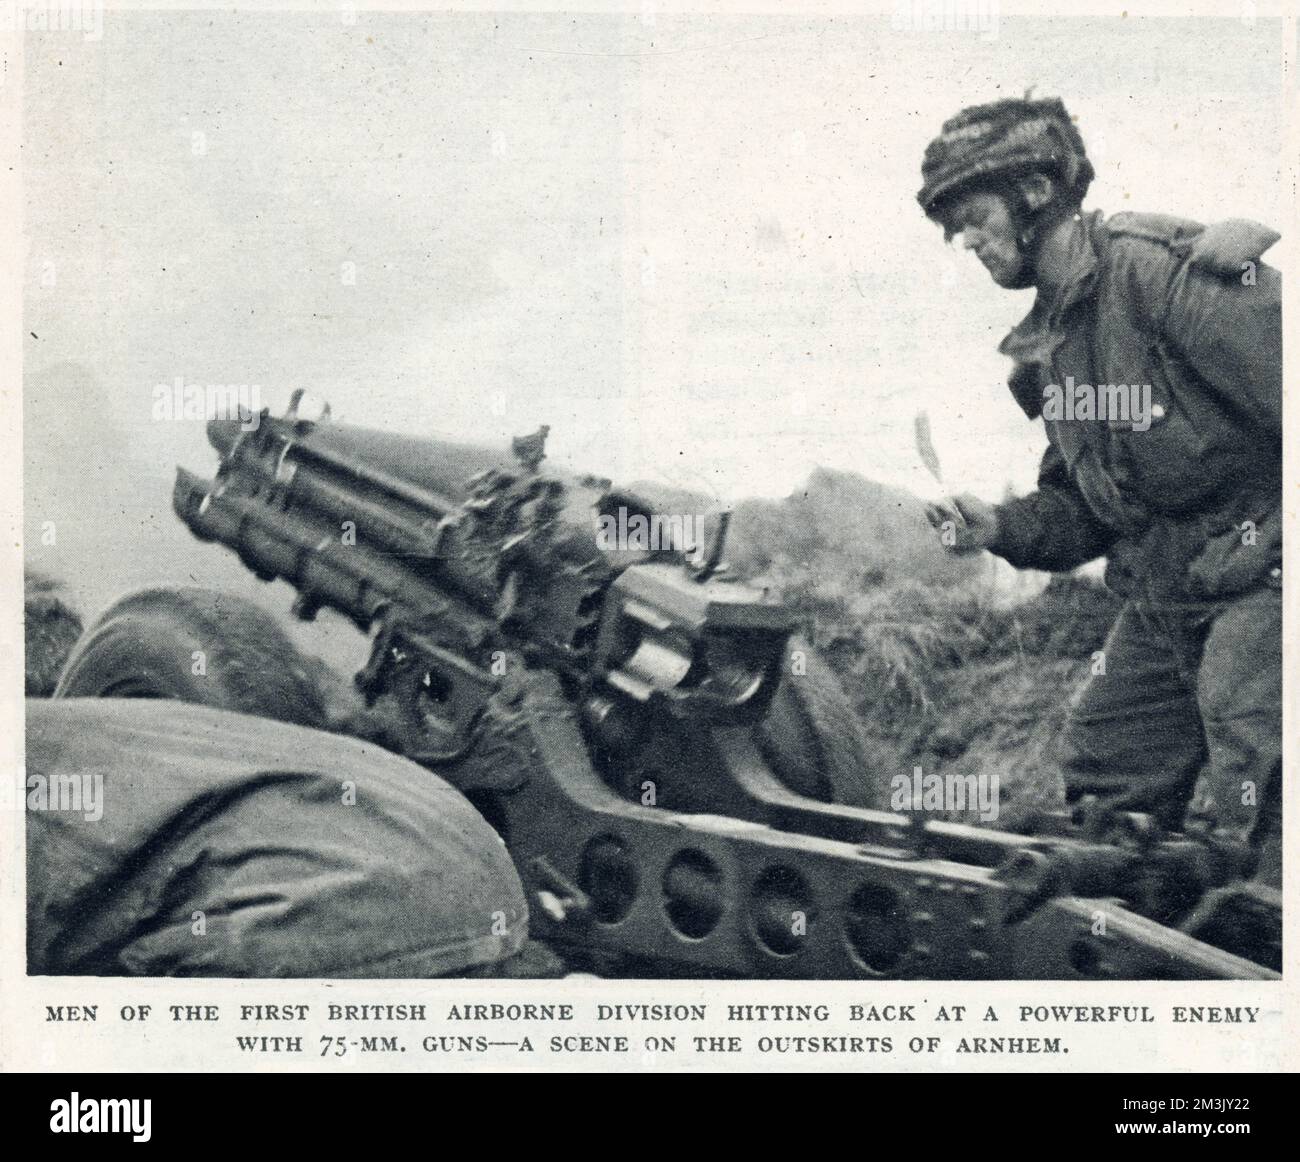 A soldier of the British First Airborne Division firing a 75mm gun at an enemy position near Arnhem, September 1944.  On 17th September 1944 Operation 'Market Garden' was put into action; a bold plan devised by Field-Marshal Montgomery to drop thousands of airborne troops into Holland to capture an invasion route into Germany. The British First Airborne, American 81st and 101st Divisions took part in the plan, which was ultimately unsuccessful. Stock Photo